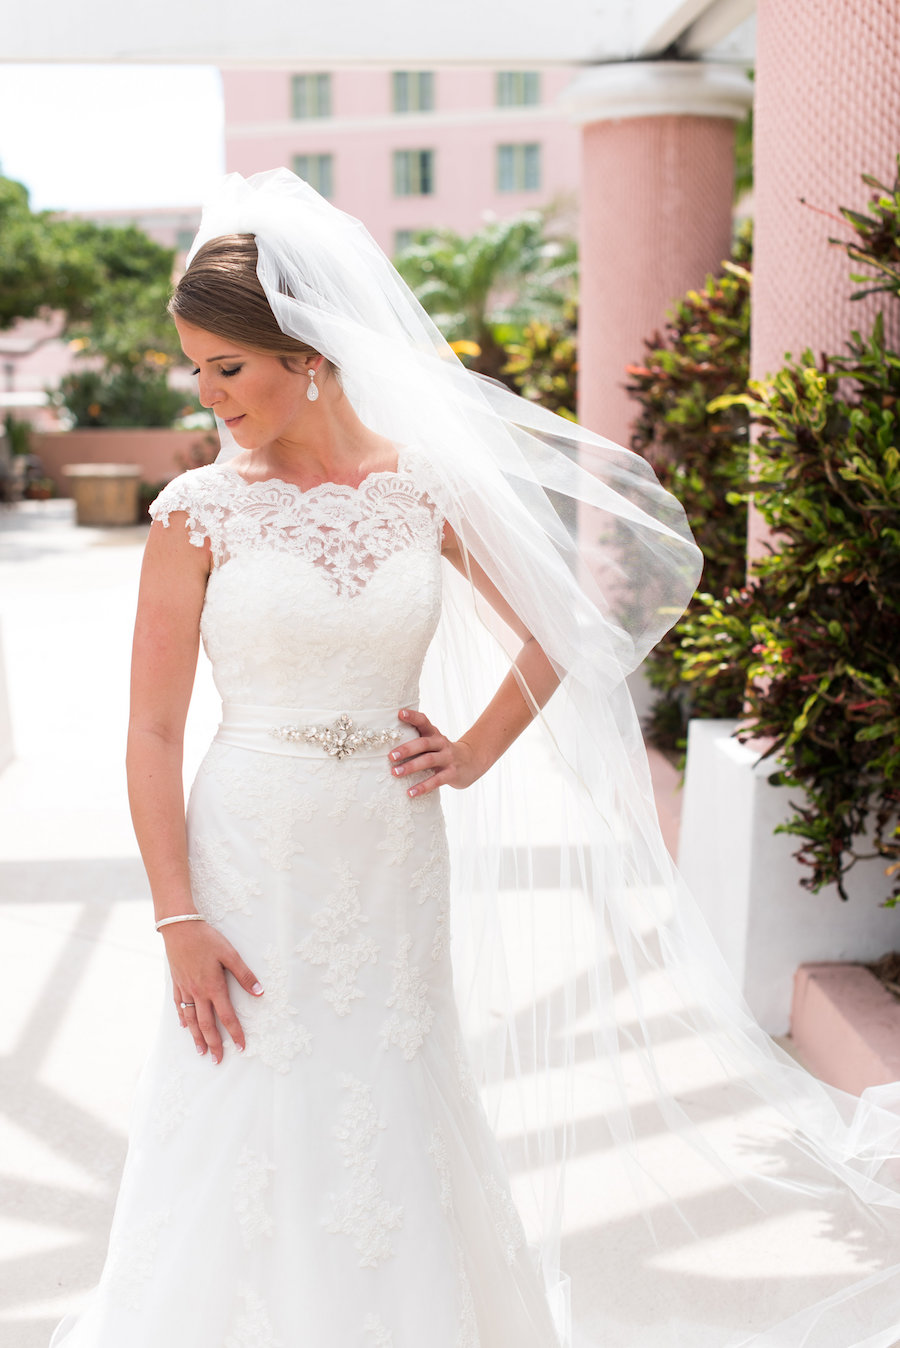 Bridal Wedding Portrait in Ivory Lace Alfred Angelo Wedding Dress with Cap Sleeves and Rhinestone Belt | St. Petersburg Wedding Photographer Caroline and Evan Photography | Wedding Hair and Makeup Michele Renee The Studio